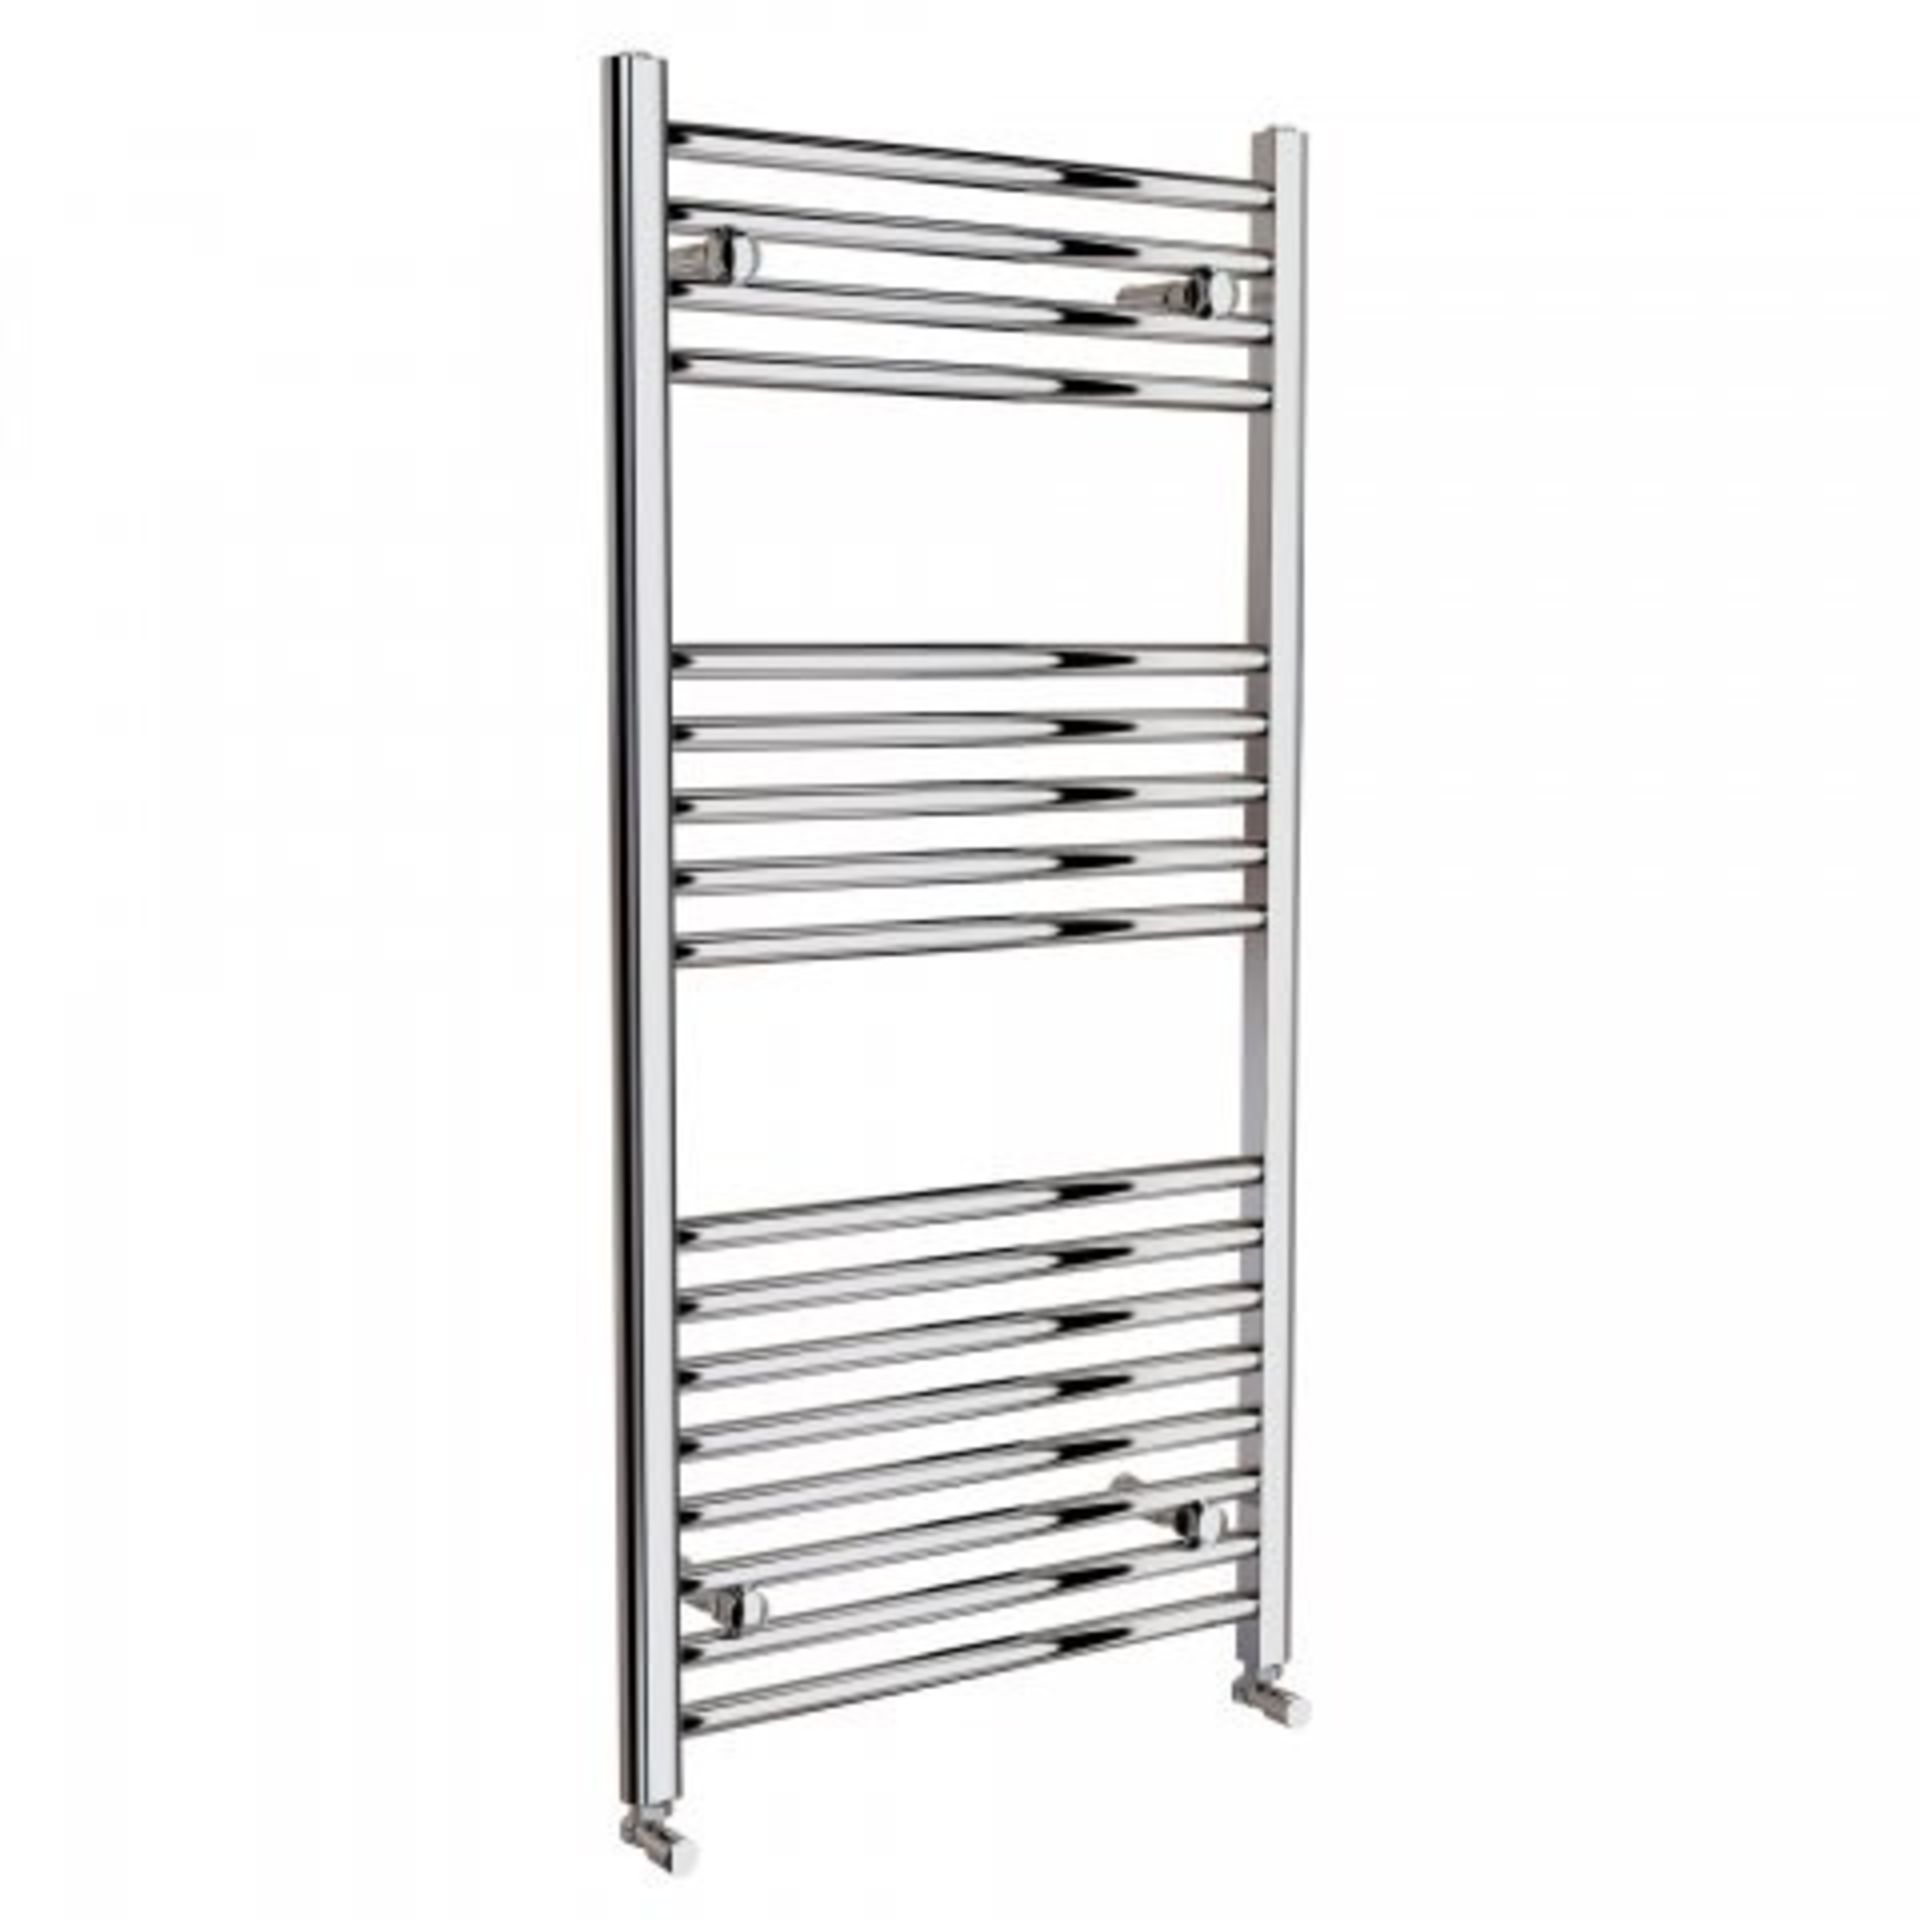 5 BRAND NEW BOXED 1200x600mm - 20mm Tubes - Chrome Heated Straight Rail Ladder Towel Radiator.RRP £ - Image 3 of 4